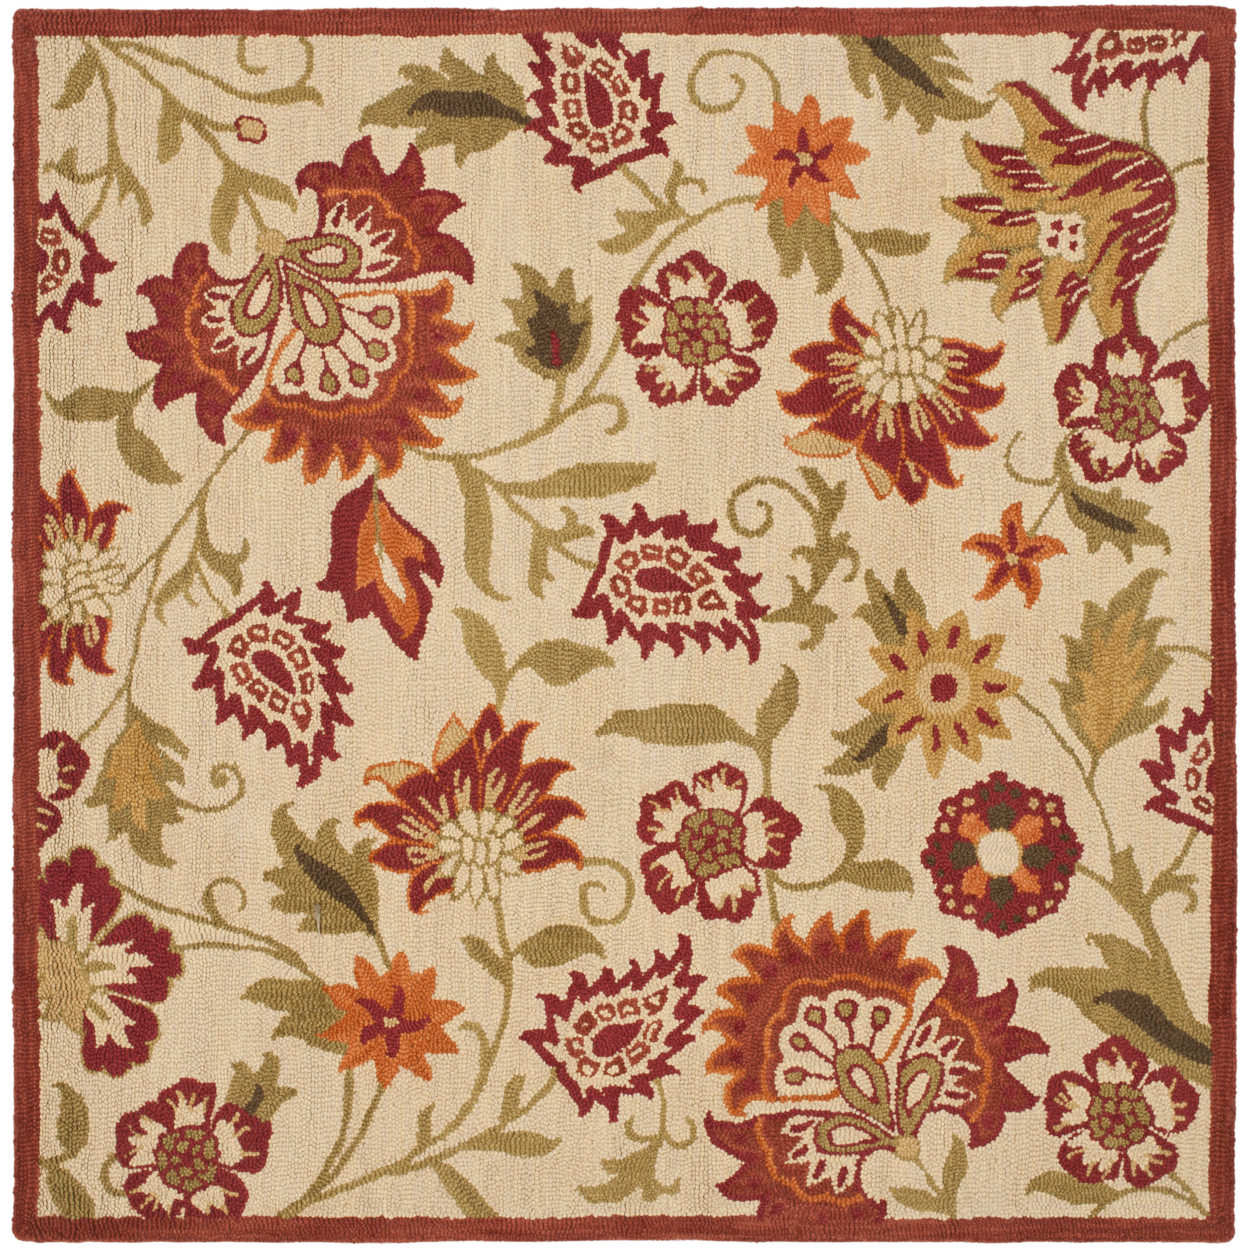 SAFAVIEH Blossom BLM862A Hand-hooked Beige / Multi Rug - 8' Square